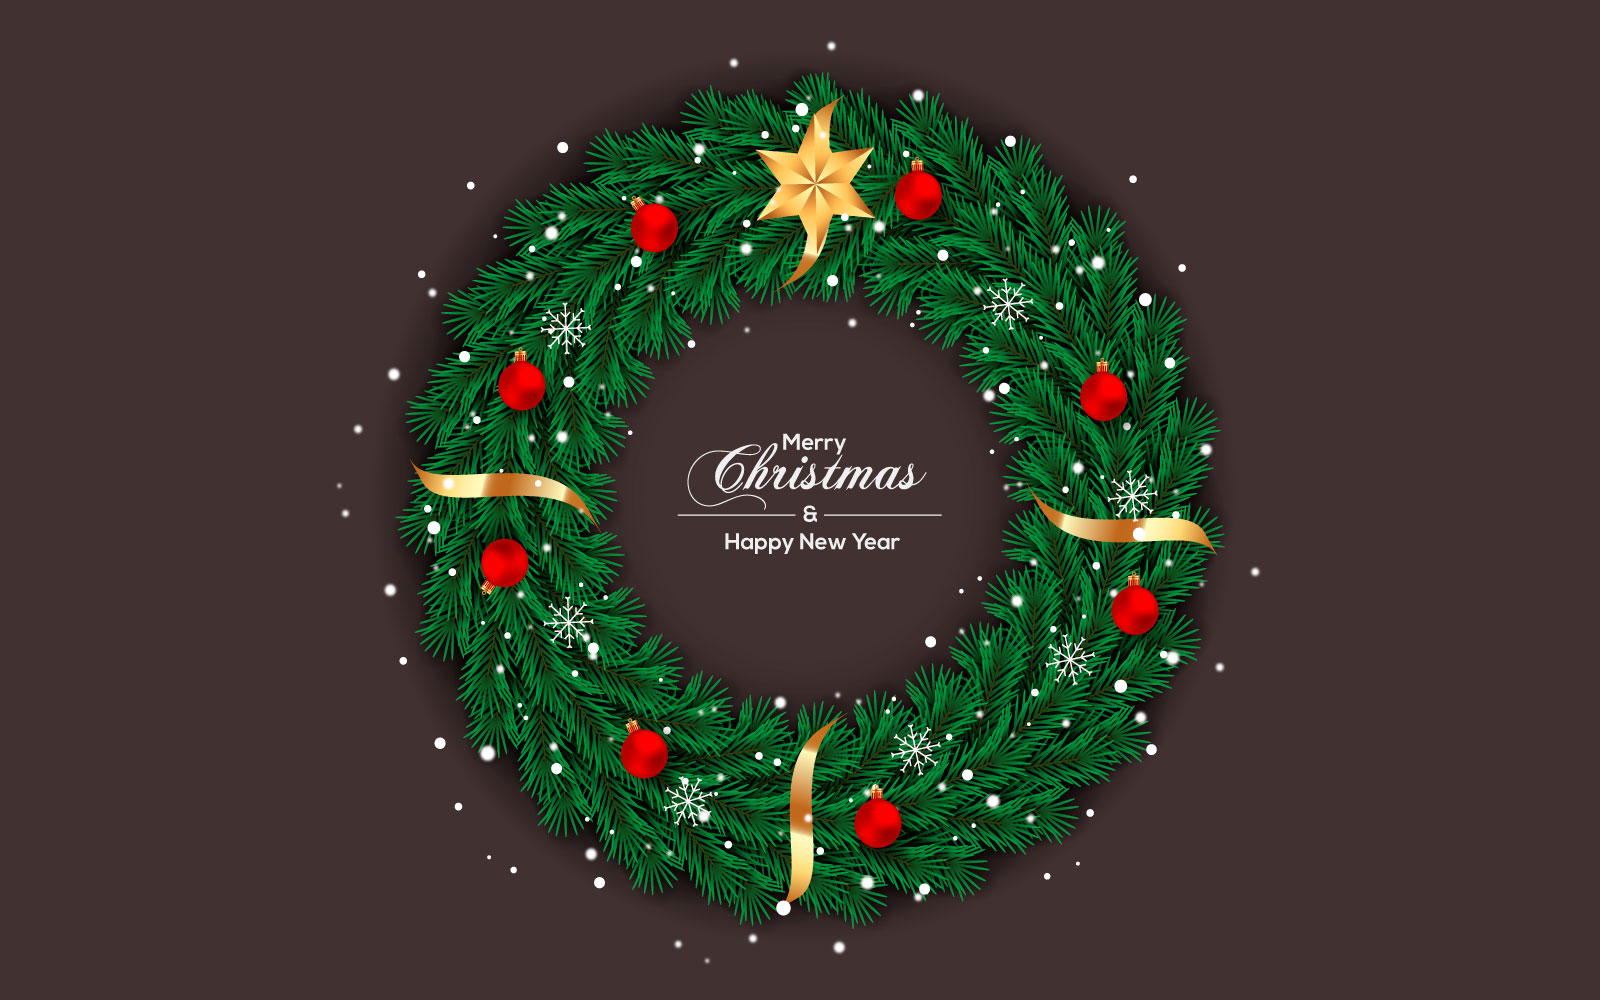 Christmas wreath with decorations on color background with pine branch and star concept